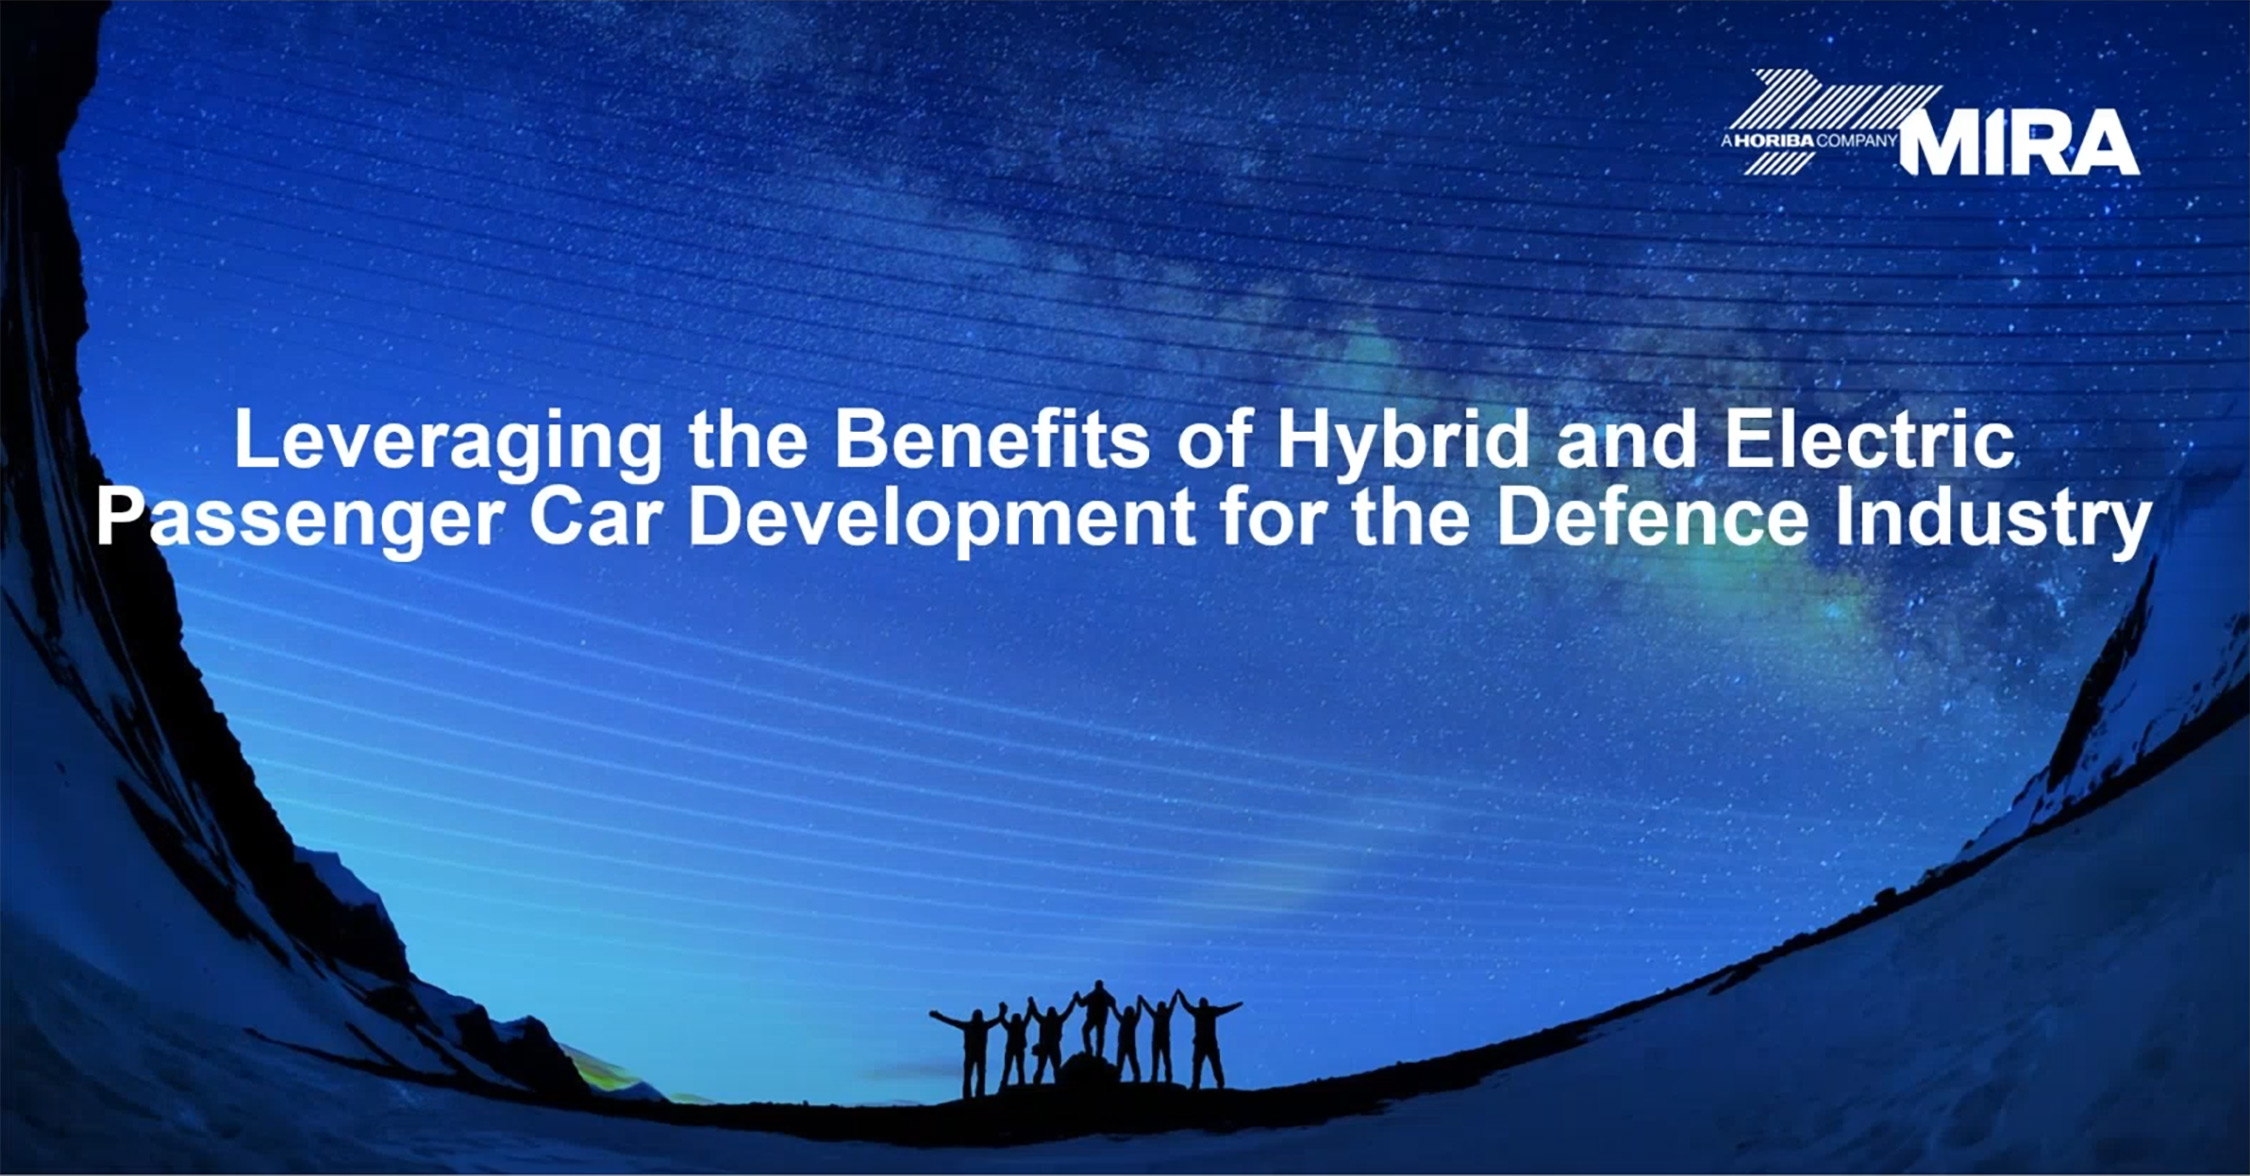 Leveraging the benefits of Hybrid and Electric passenger car development